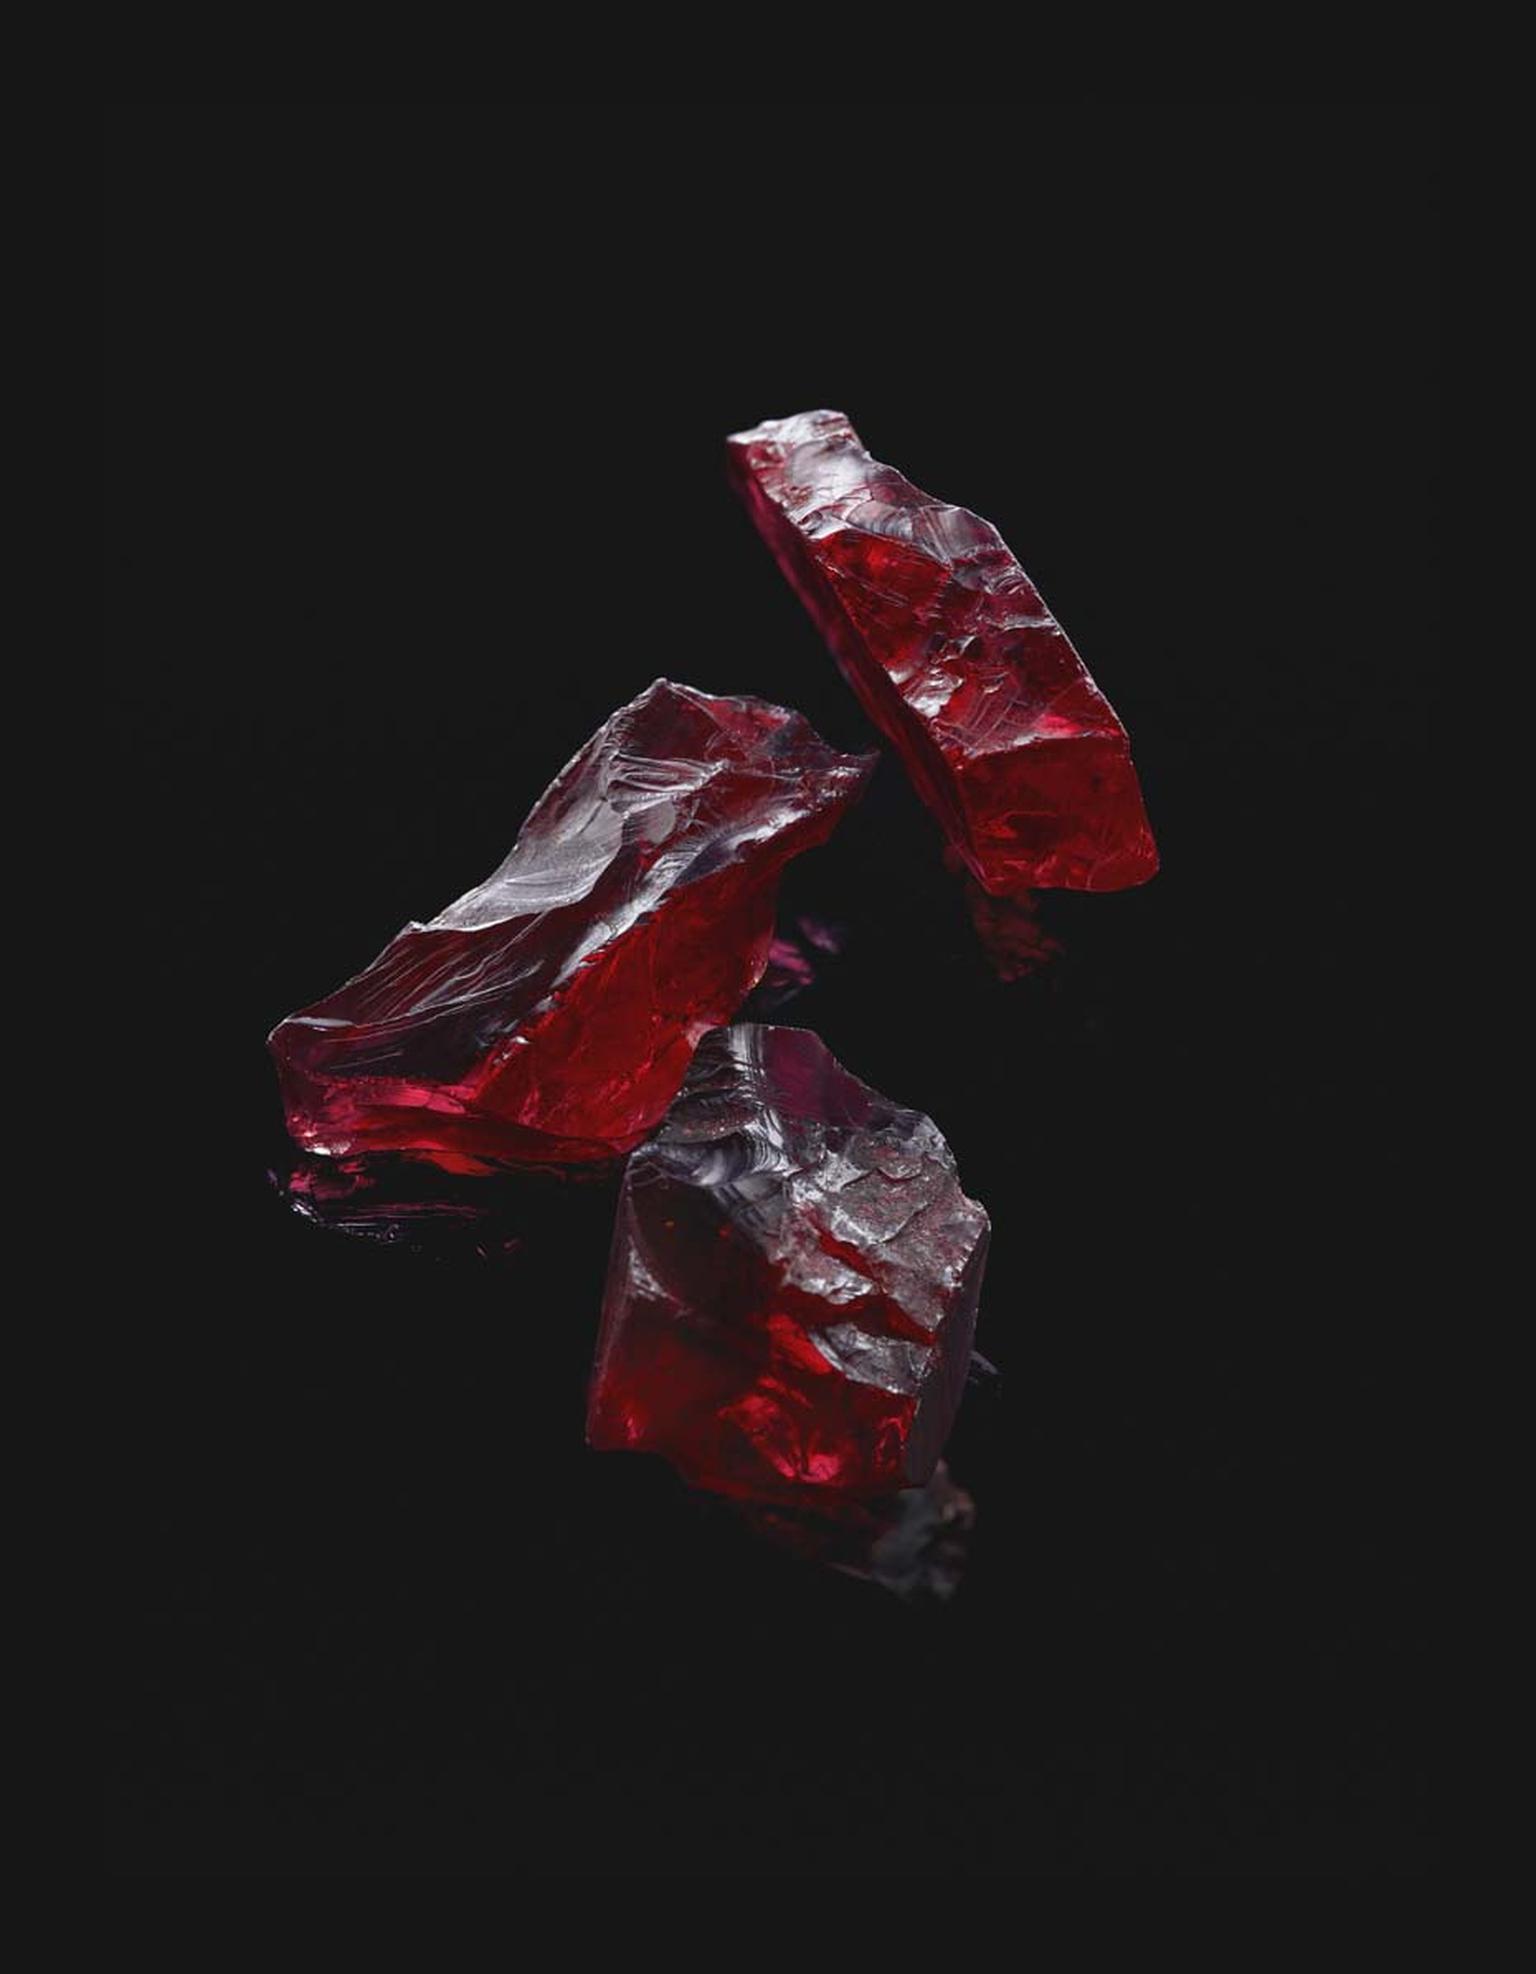 Gemfields production of African rubies in its Mozambique mine has enabled production of some stunning ruby jewellery, when the rough-cut gemstones, like these, are polished into beautiful jewels.